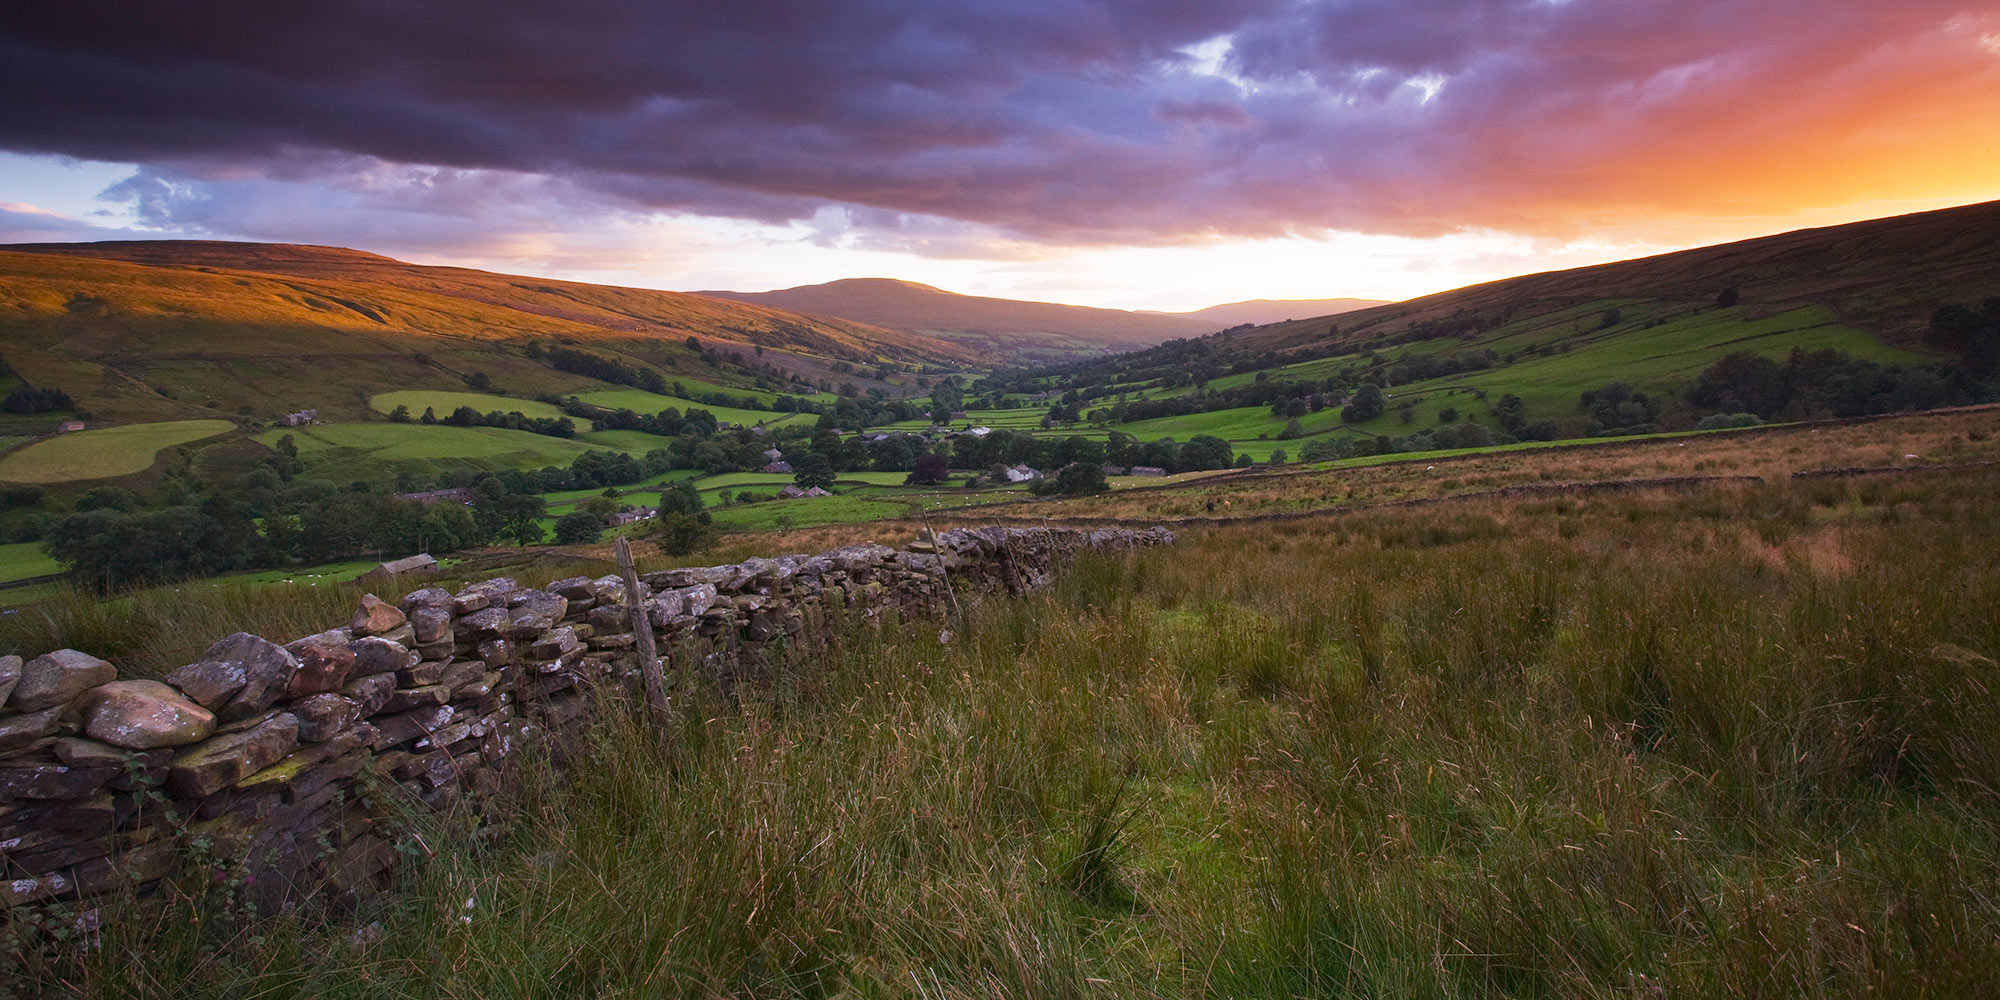 Sunset over hills with traditional dry stone walls in the foreground